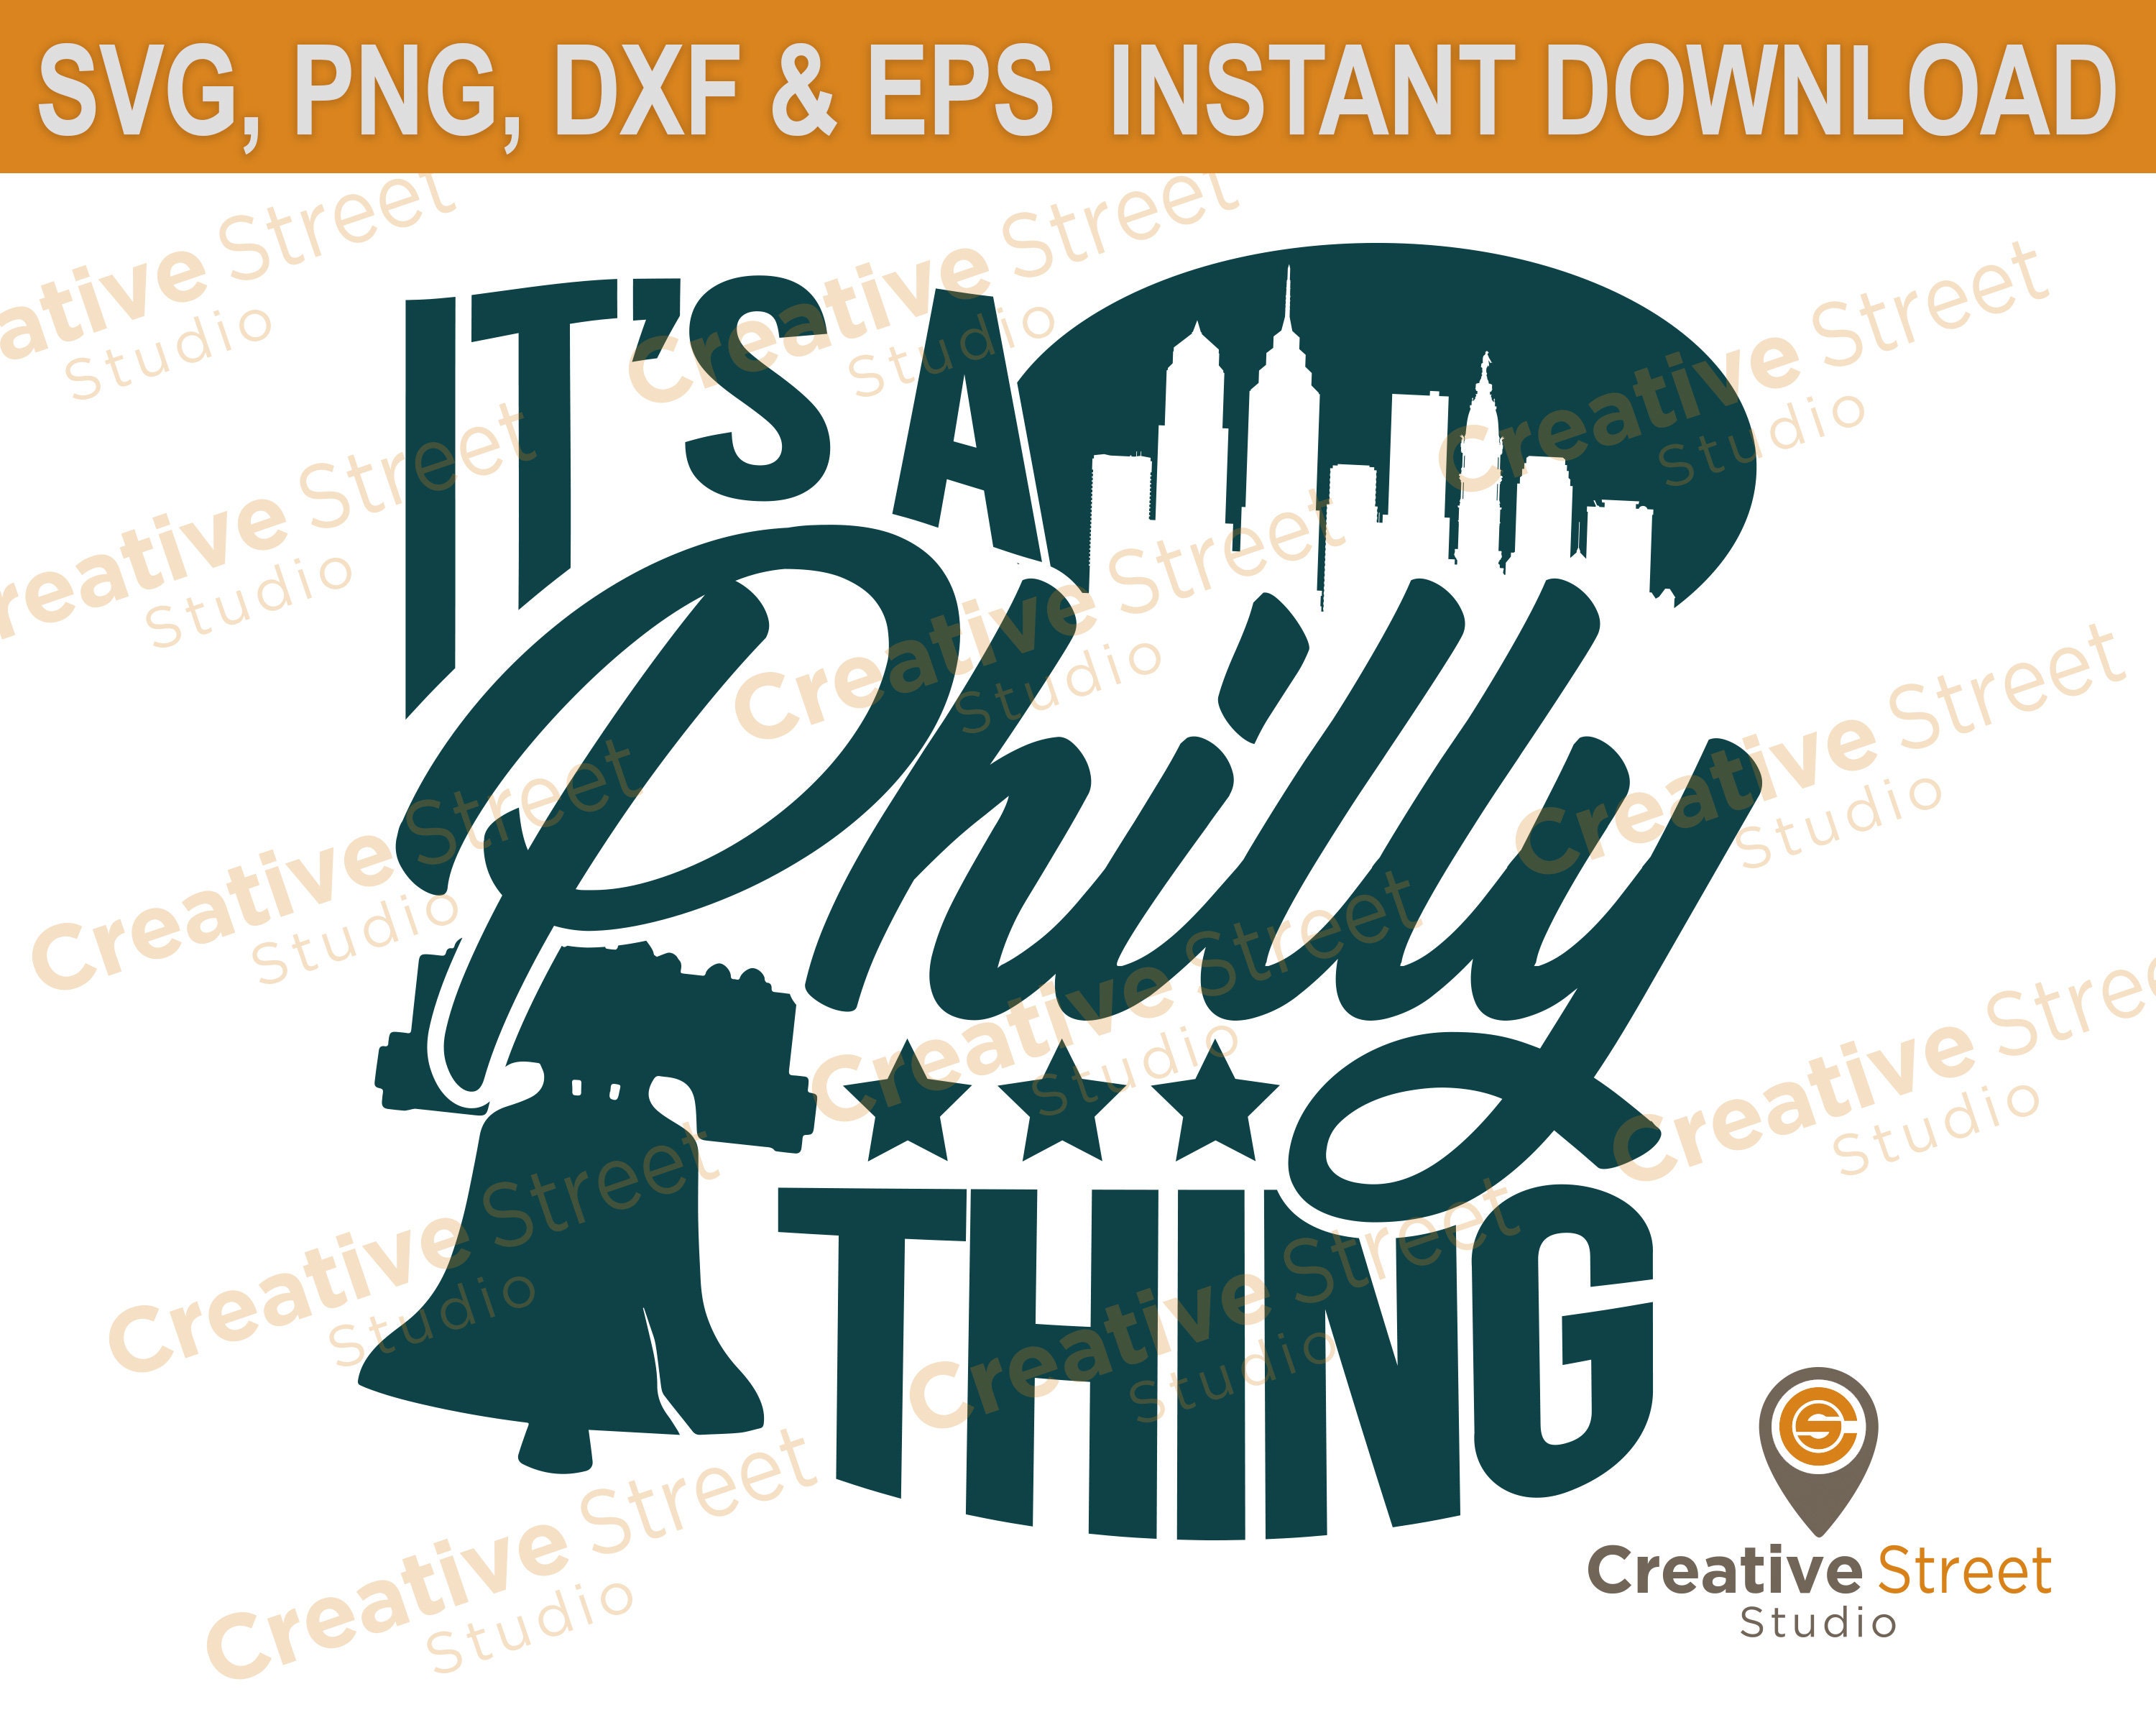 It's a Philly thing Philadelphia SVG, Eagles SVG, Philly Thing SVG Cricut  Silhouette Clipart